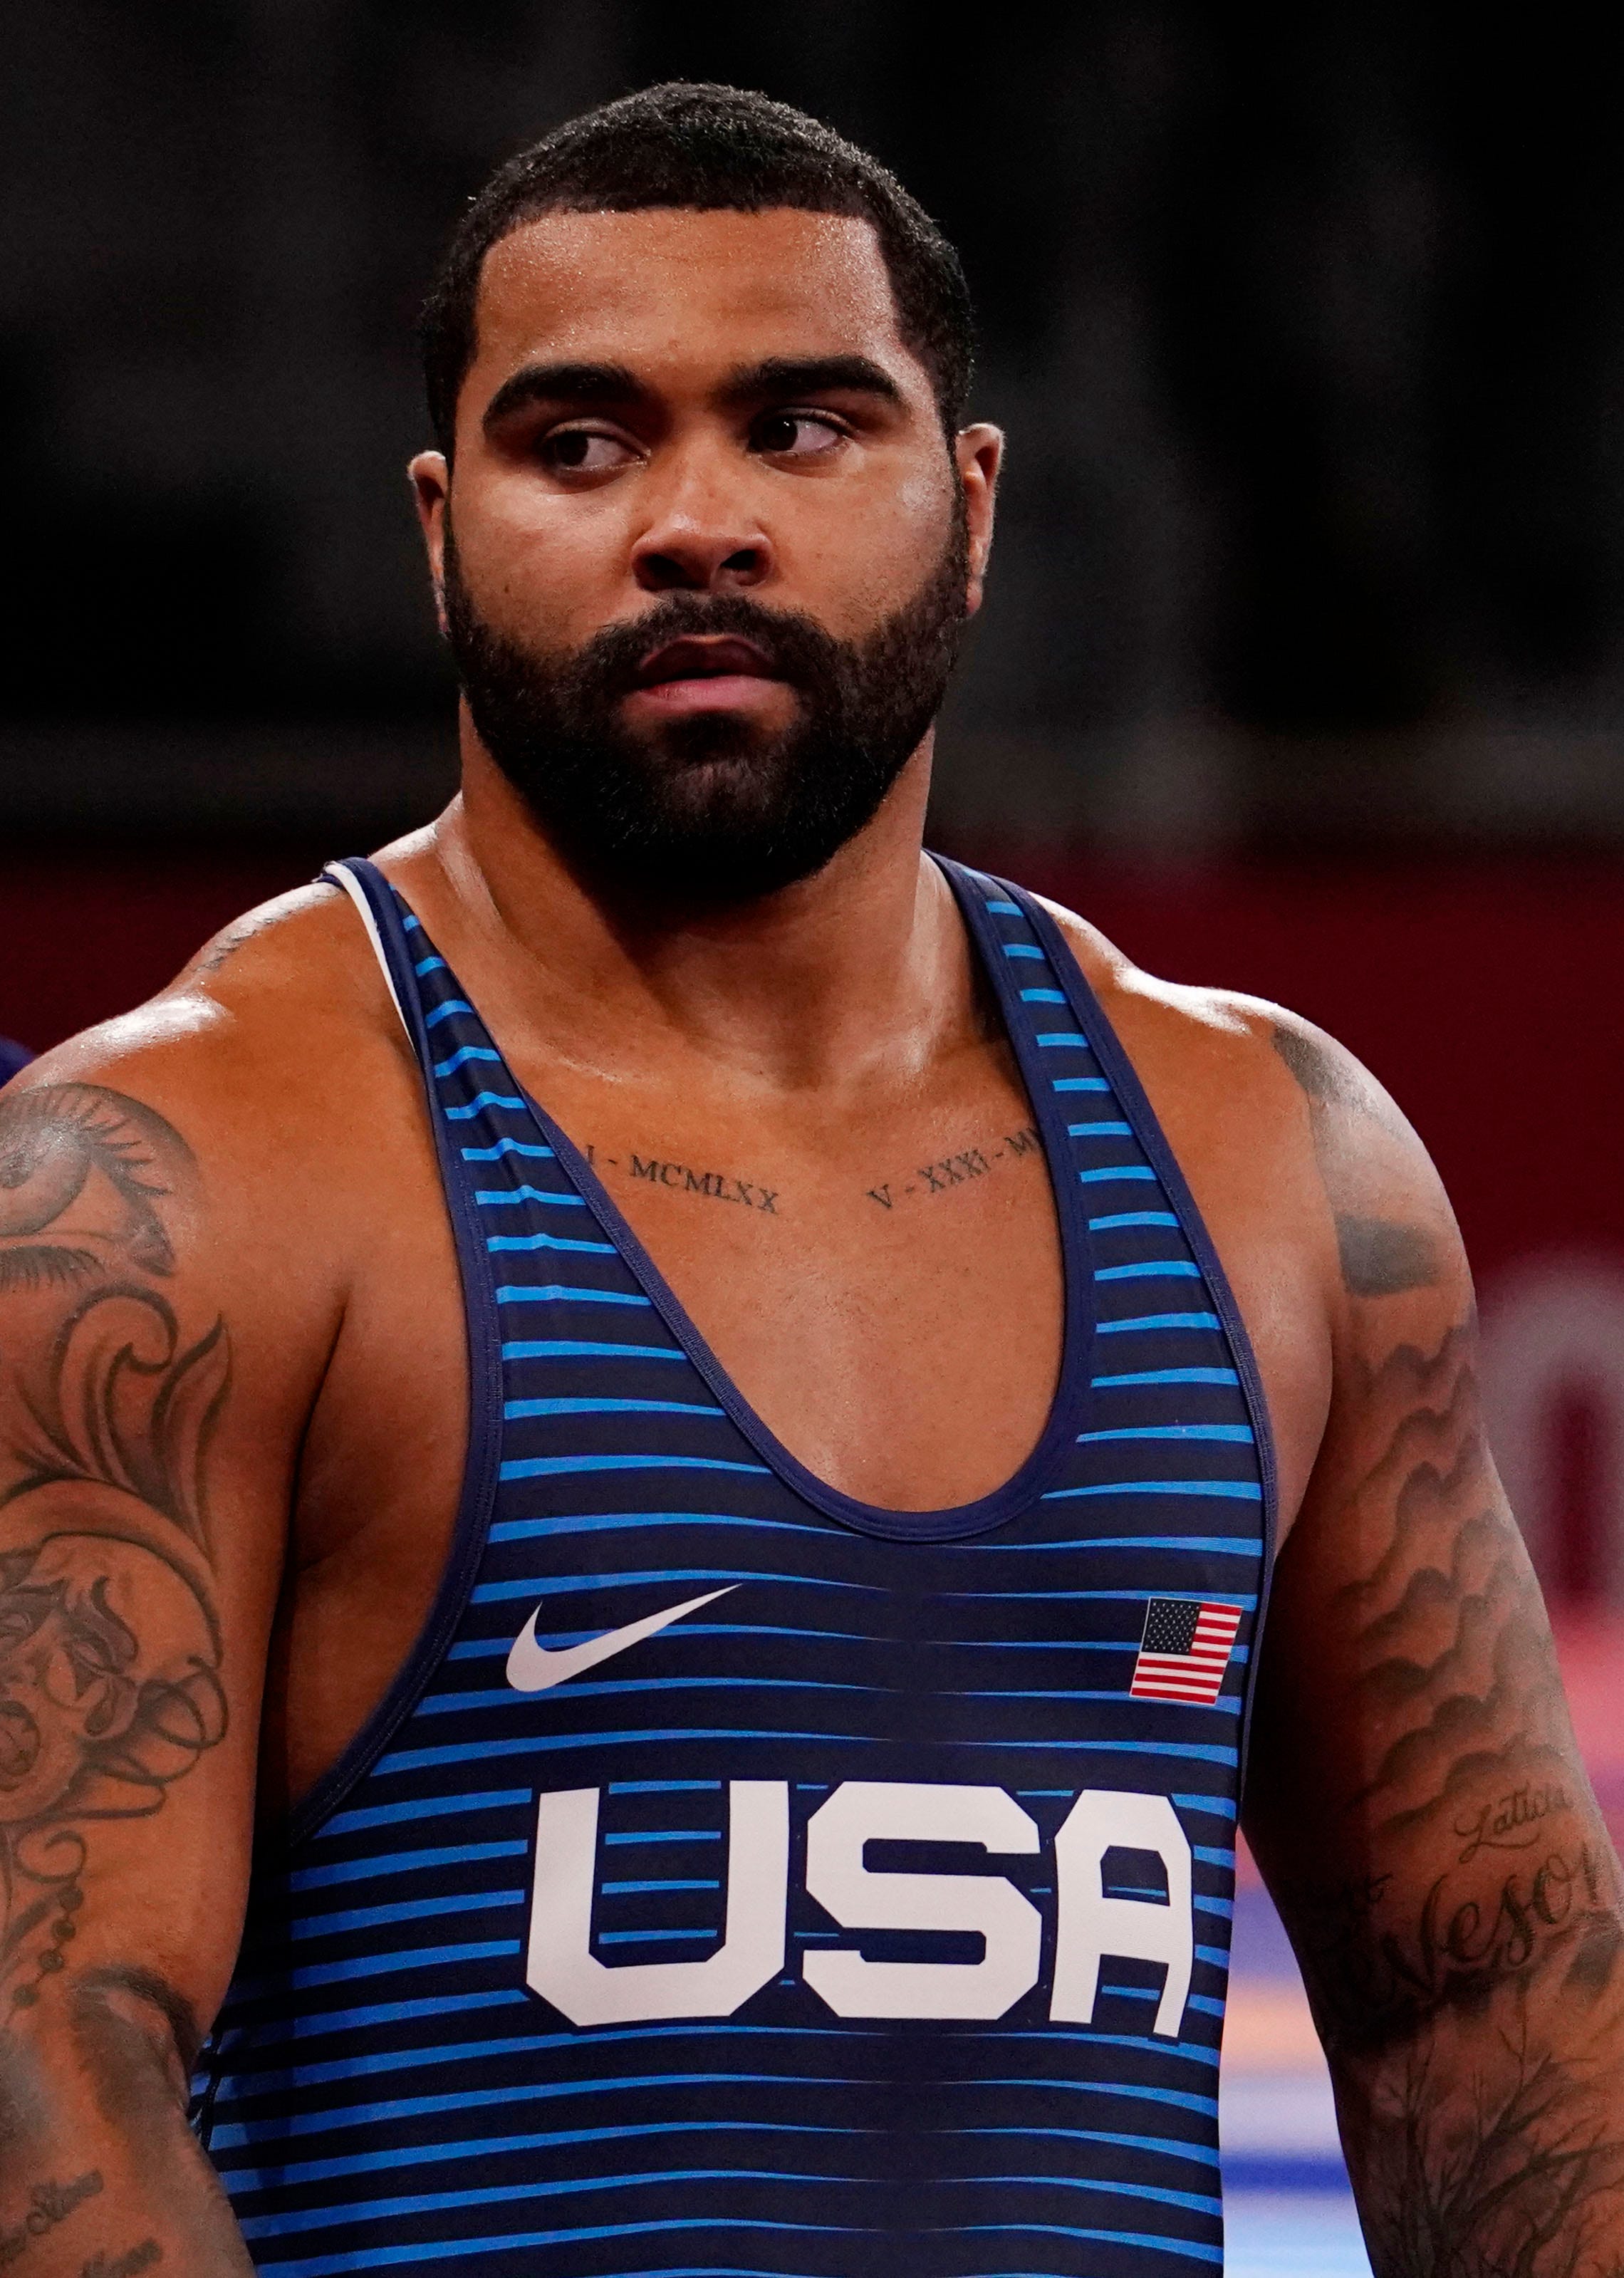 Gable Steveson can add $000 to US wrestlers' prize haul with a gold medal